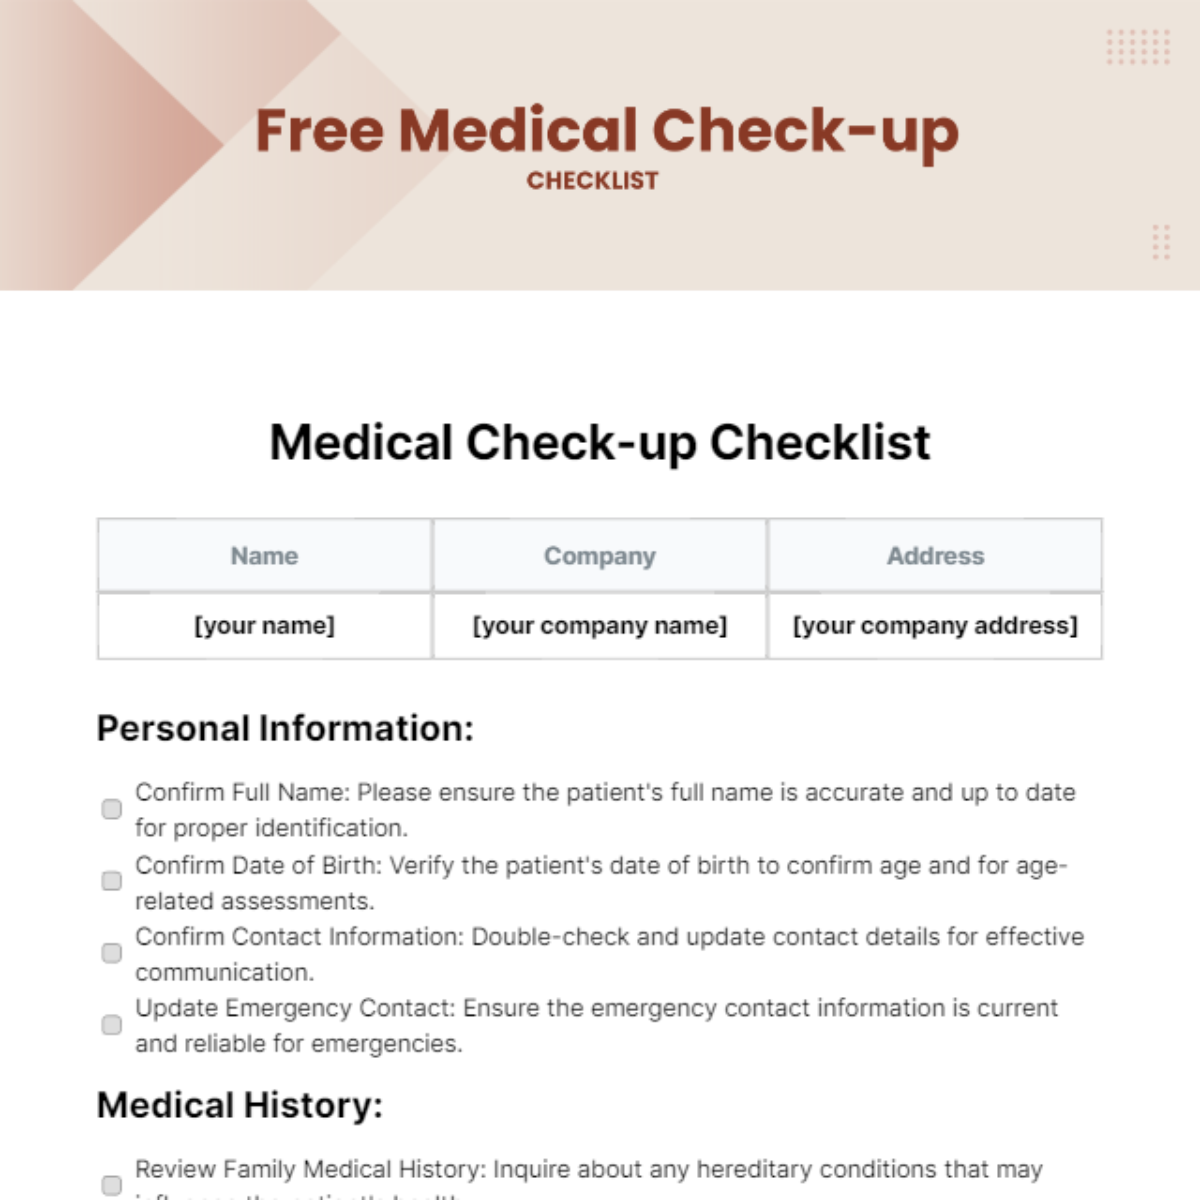 Free Medical Check-up Checklist Template